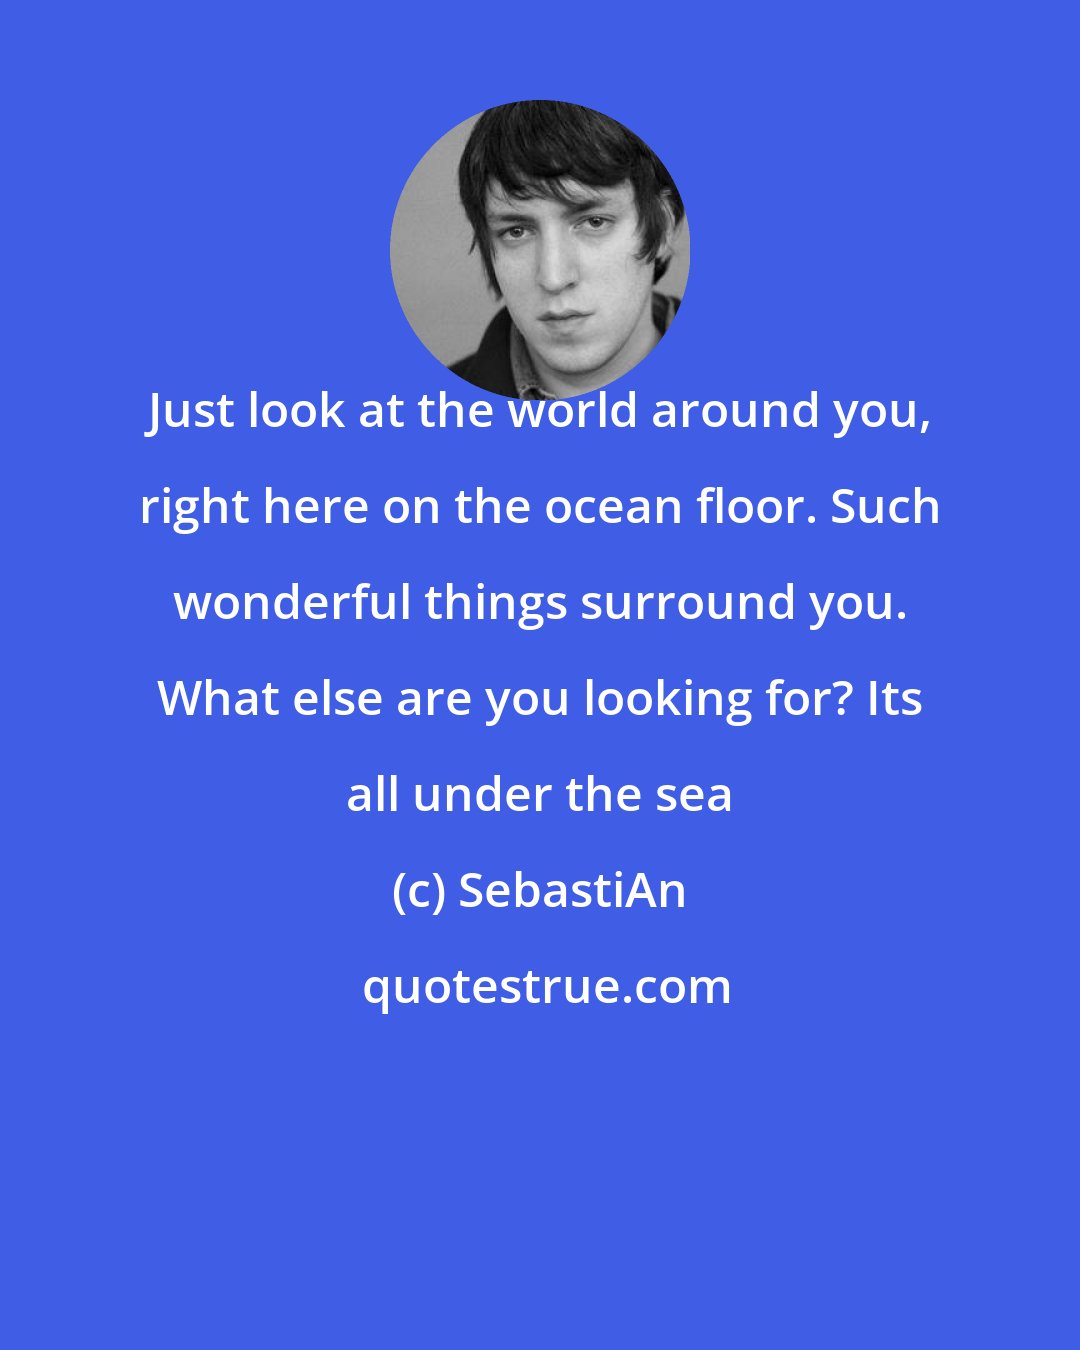 SebastiAn: Just look at the world around you, right here on the ocean floor. Such wonderful things surround you. What else are you looking for? Its all under the sea